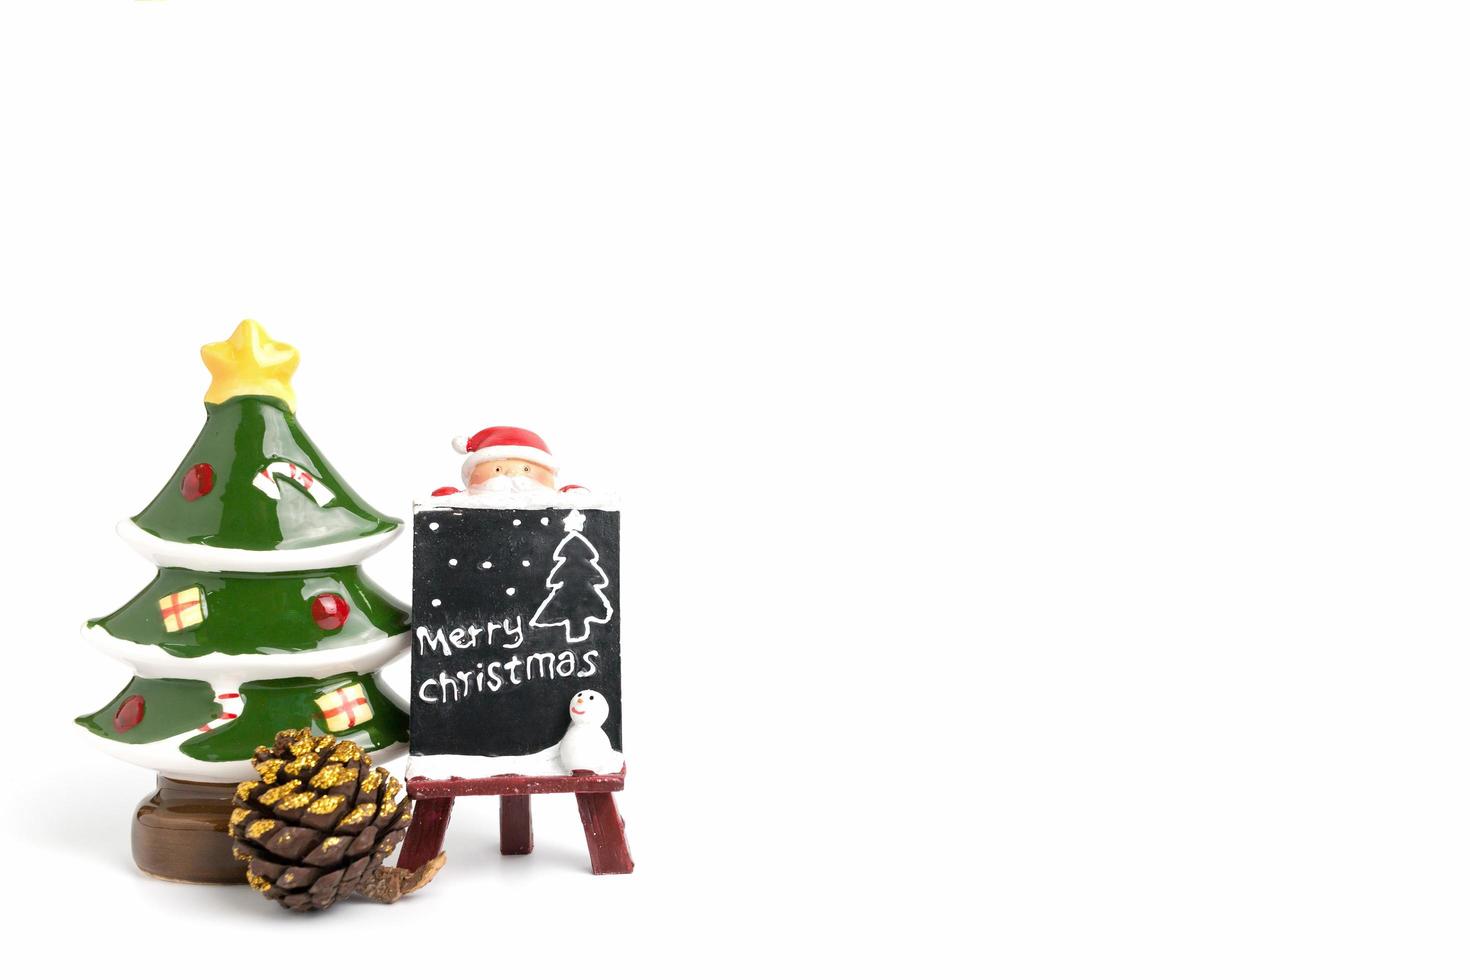 Santa Claus figurine with a miniature chalkboard with Merry Christmas text on a white background photo